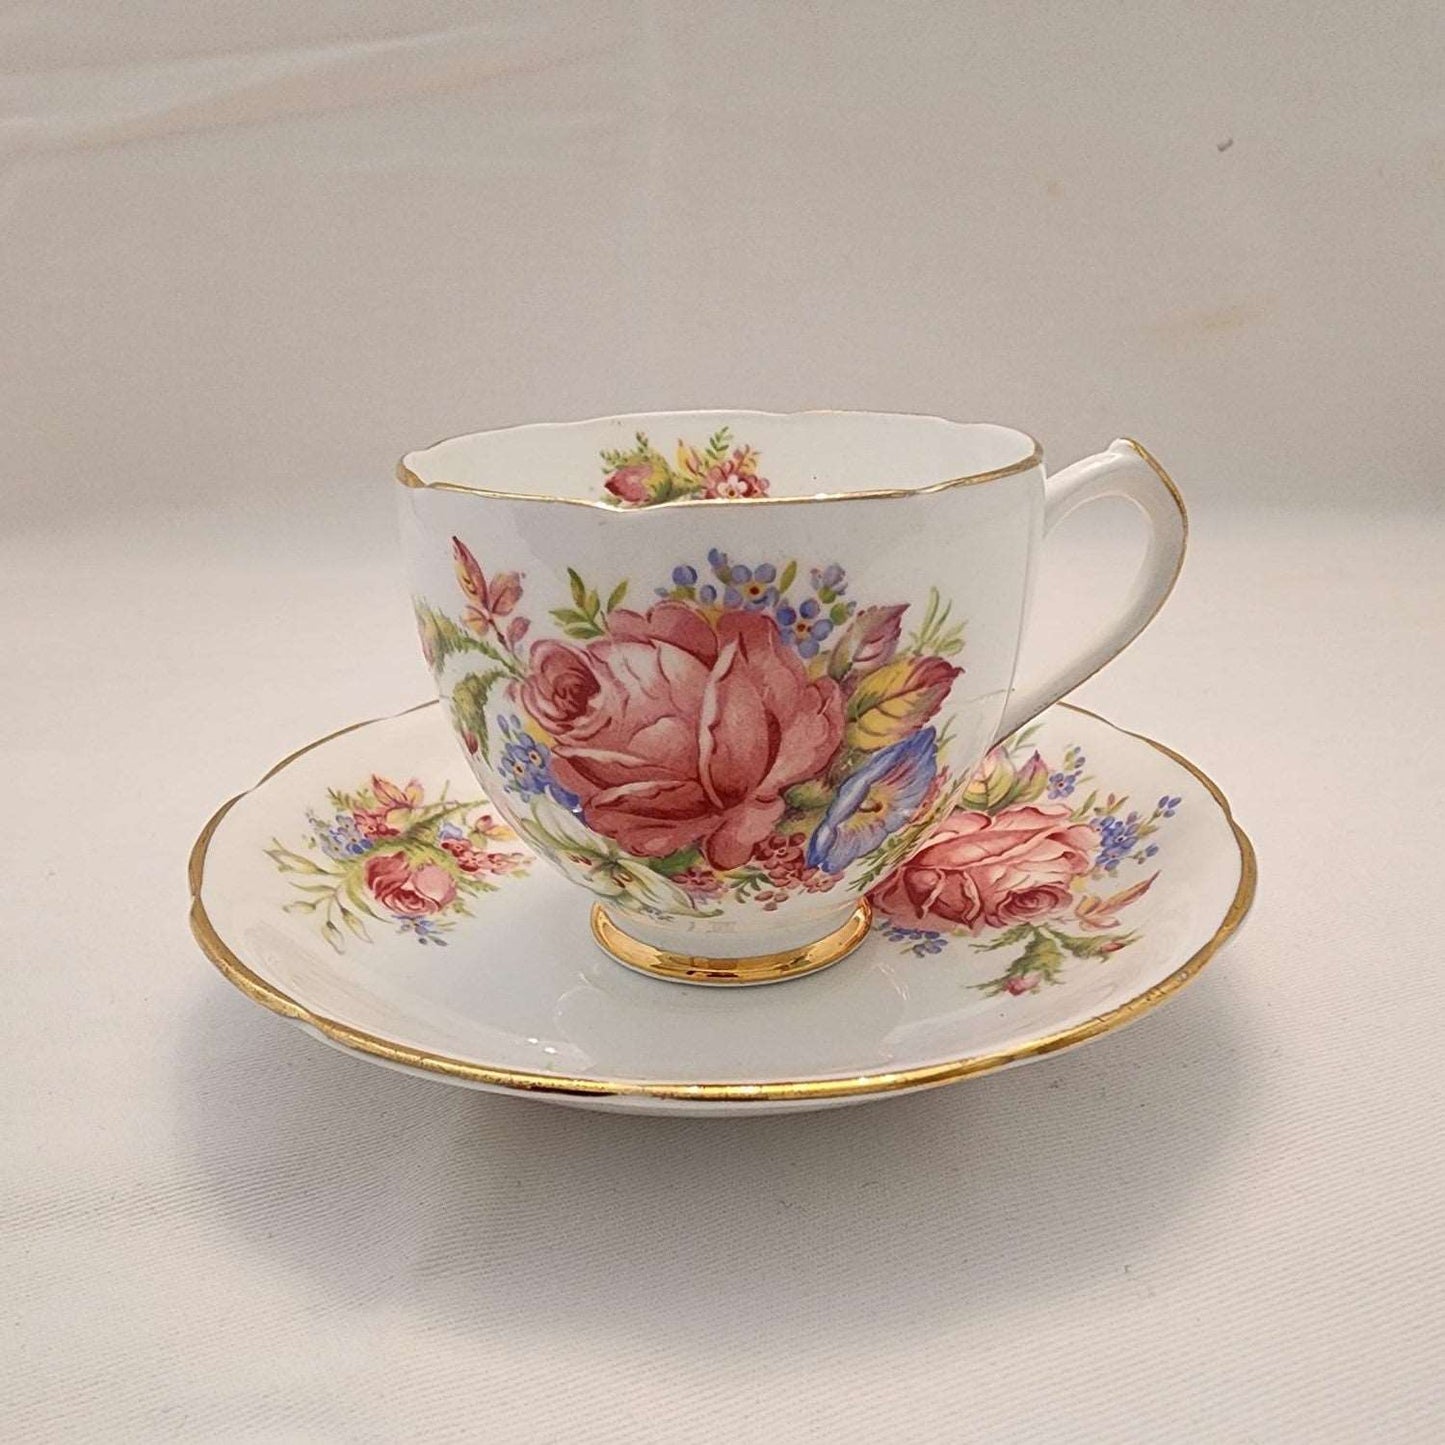 Vintage Duchess Tea Cup and Saucer